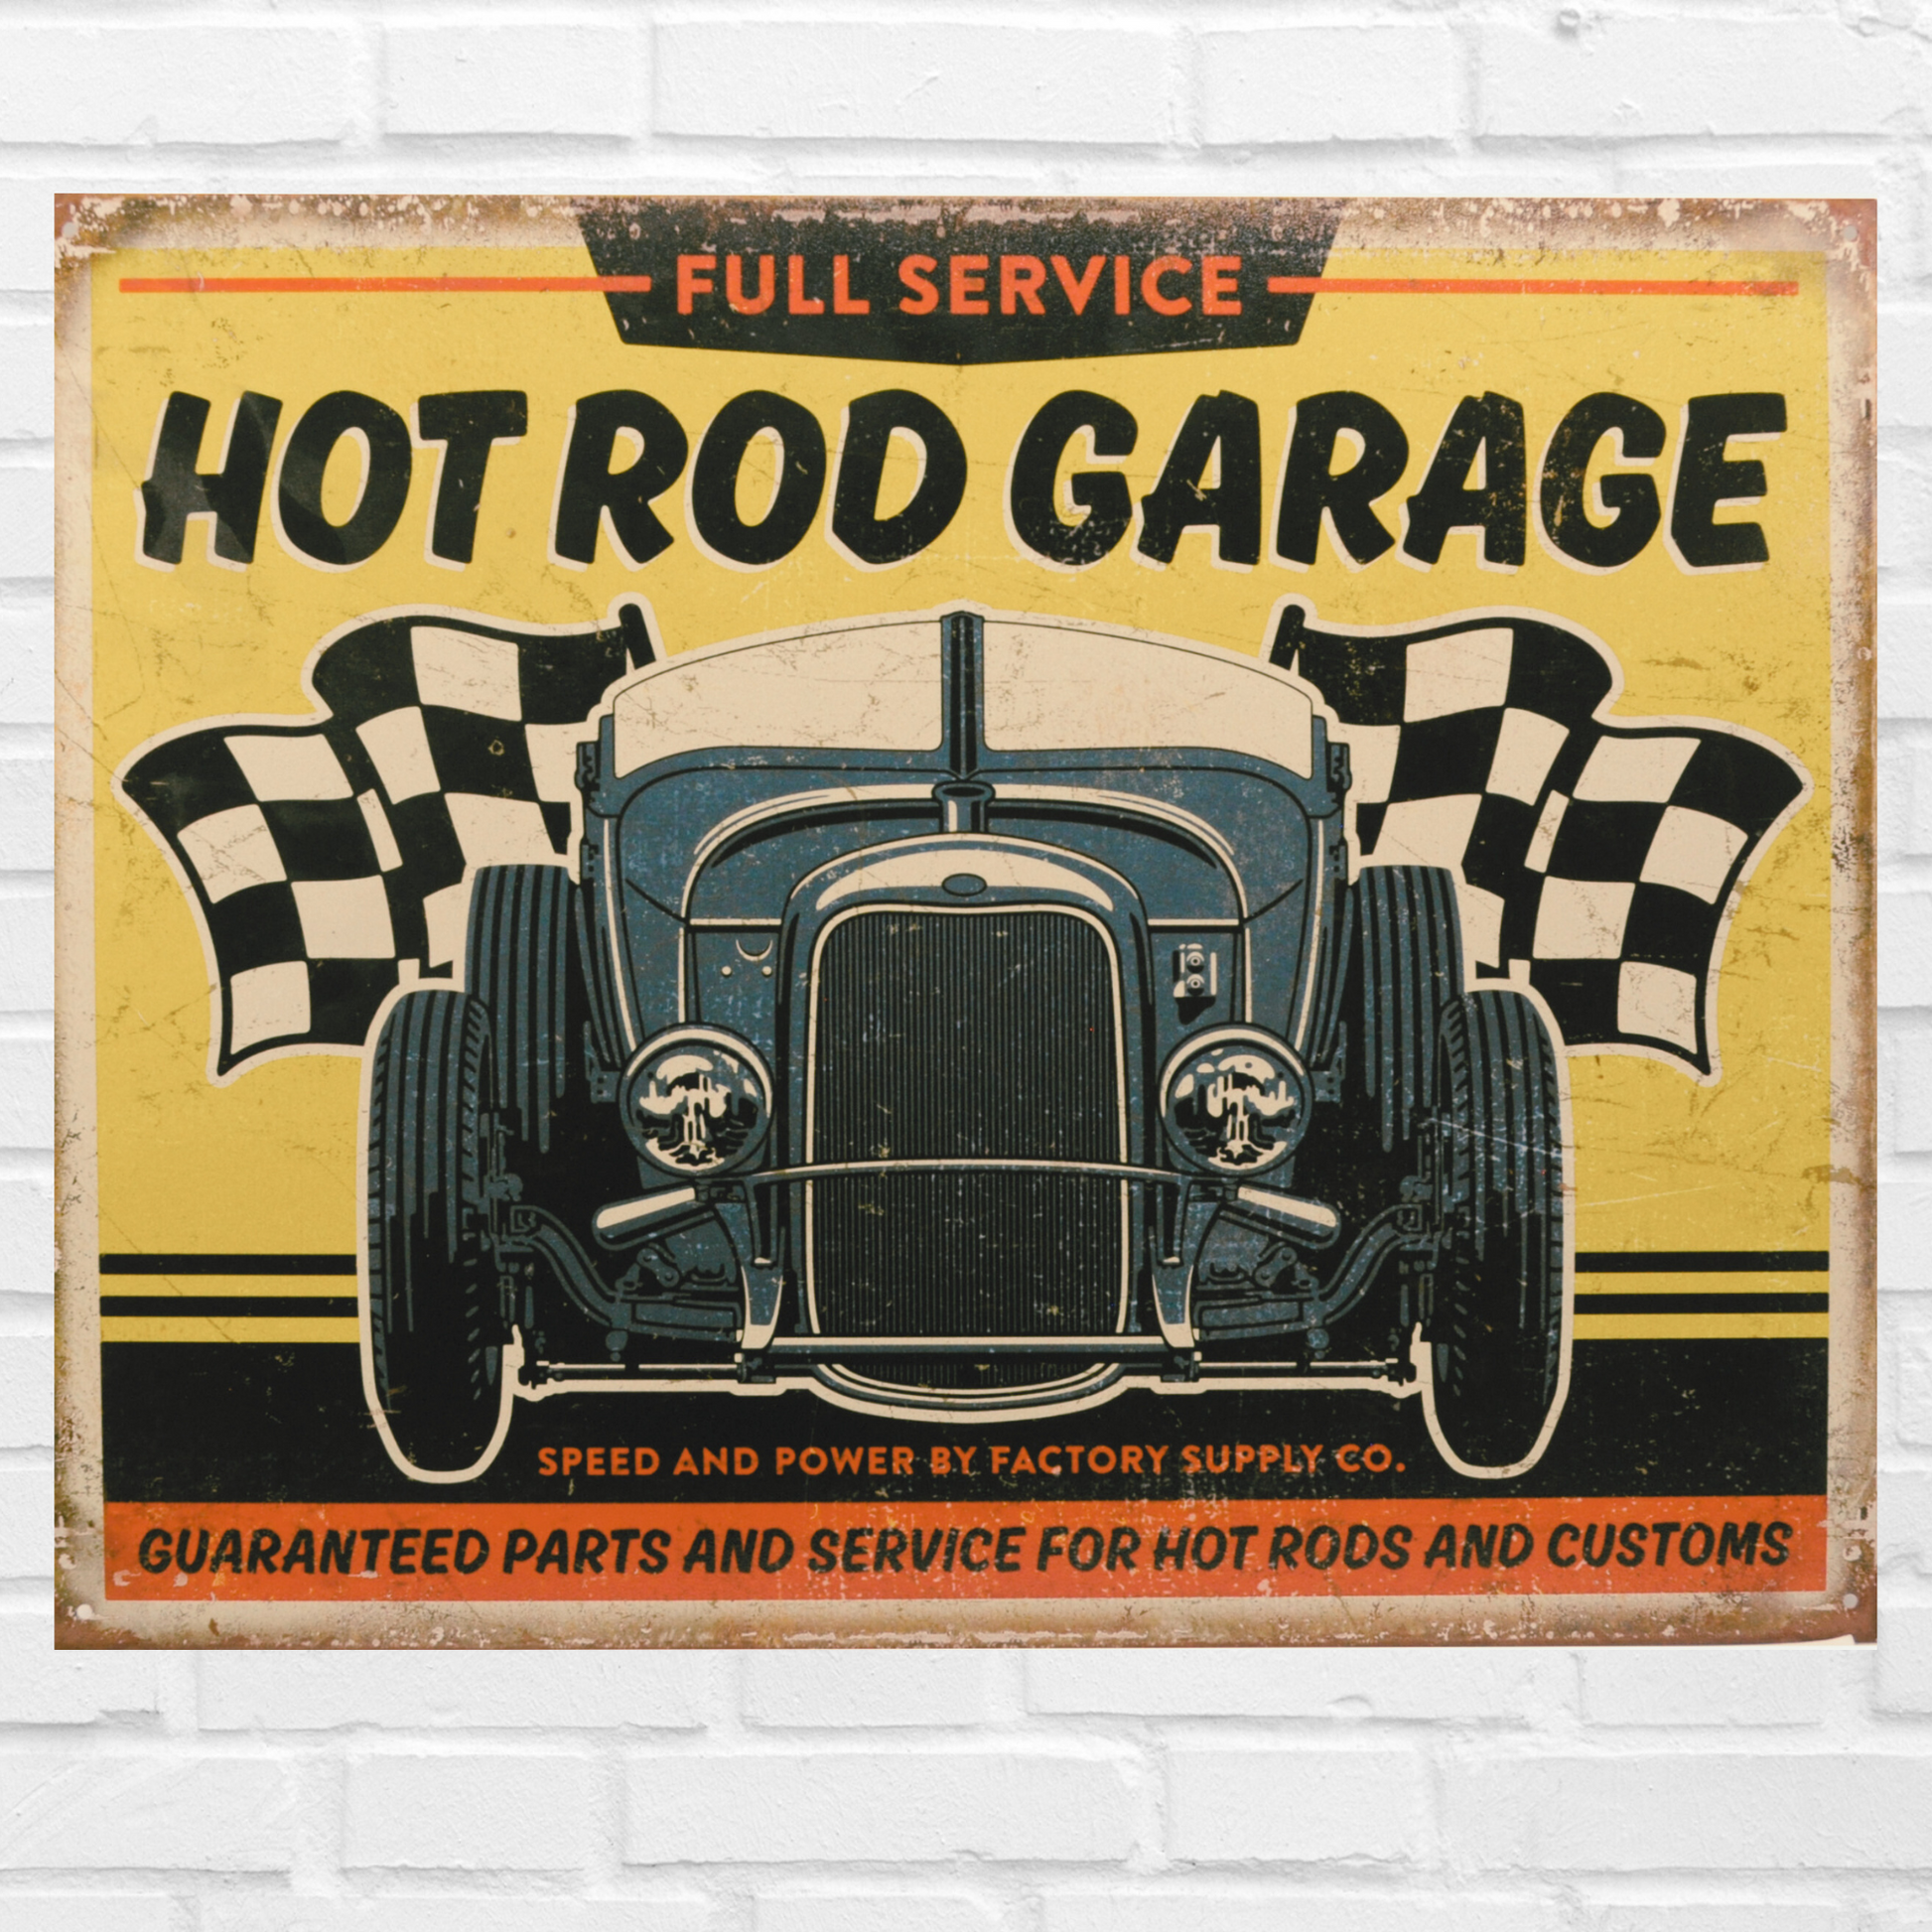 Vintage Poster Print that says "Full service Hot Rod Garage, Guaranteed part and service for hot rods and customs" with a vintage car in the middle. 